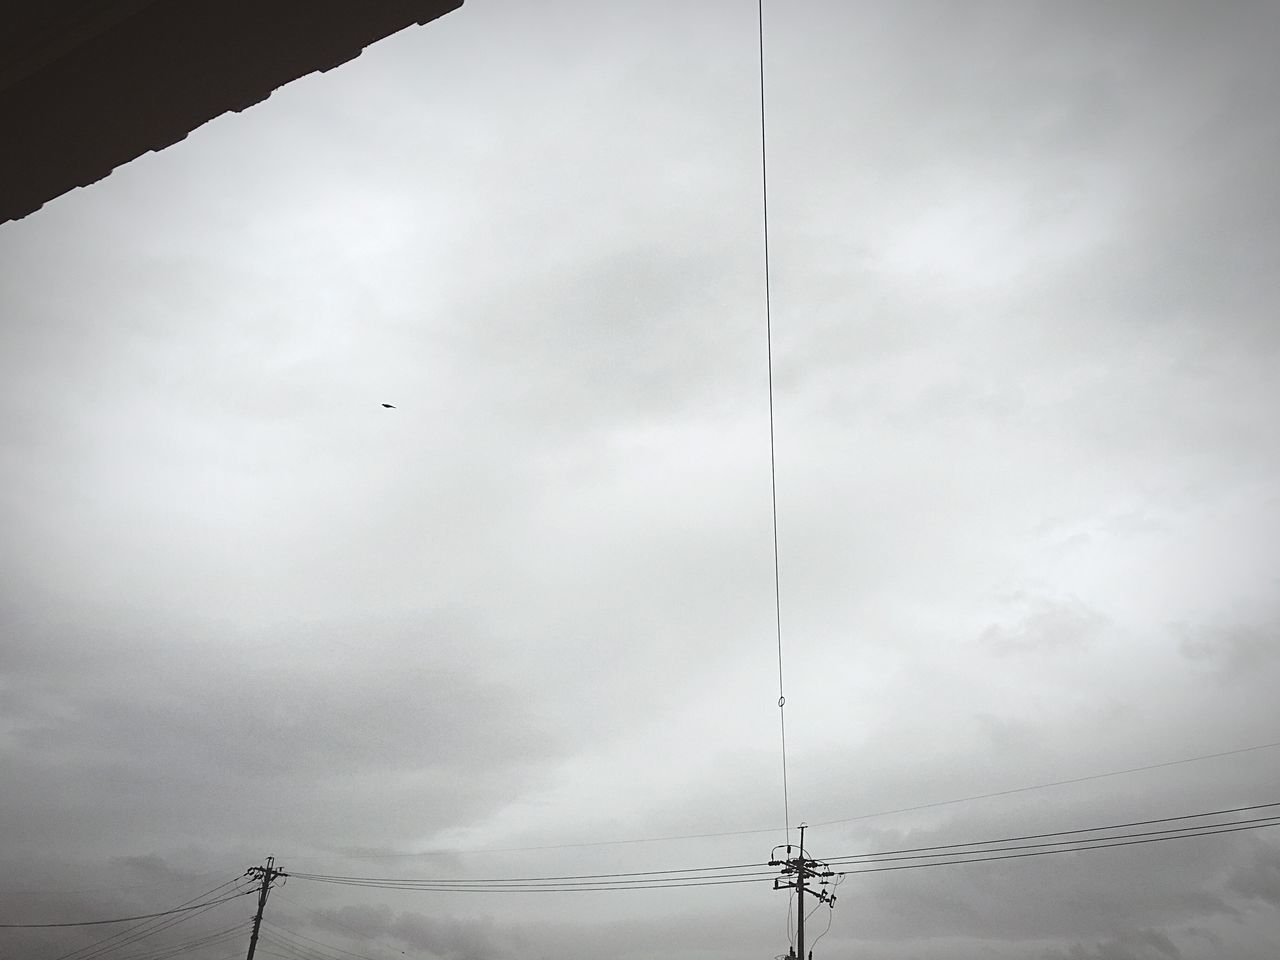 low angle view, power line, sky, electricity, fuel and power generation, cloud - sky, technology, electricity pylon, cable, connection, power supply, cloudy, silhouette, bird, weather, overcast, street light, pole, nature, outdoors